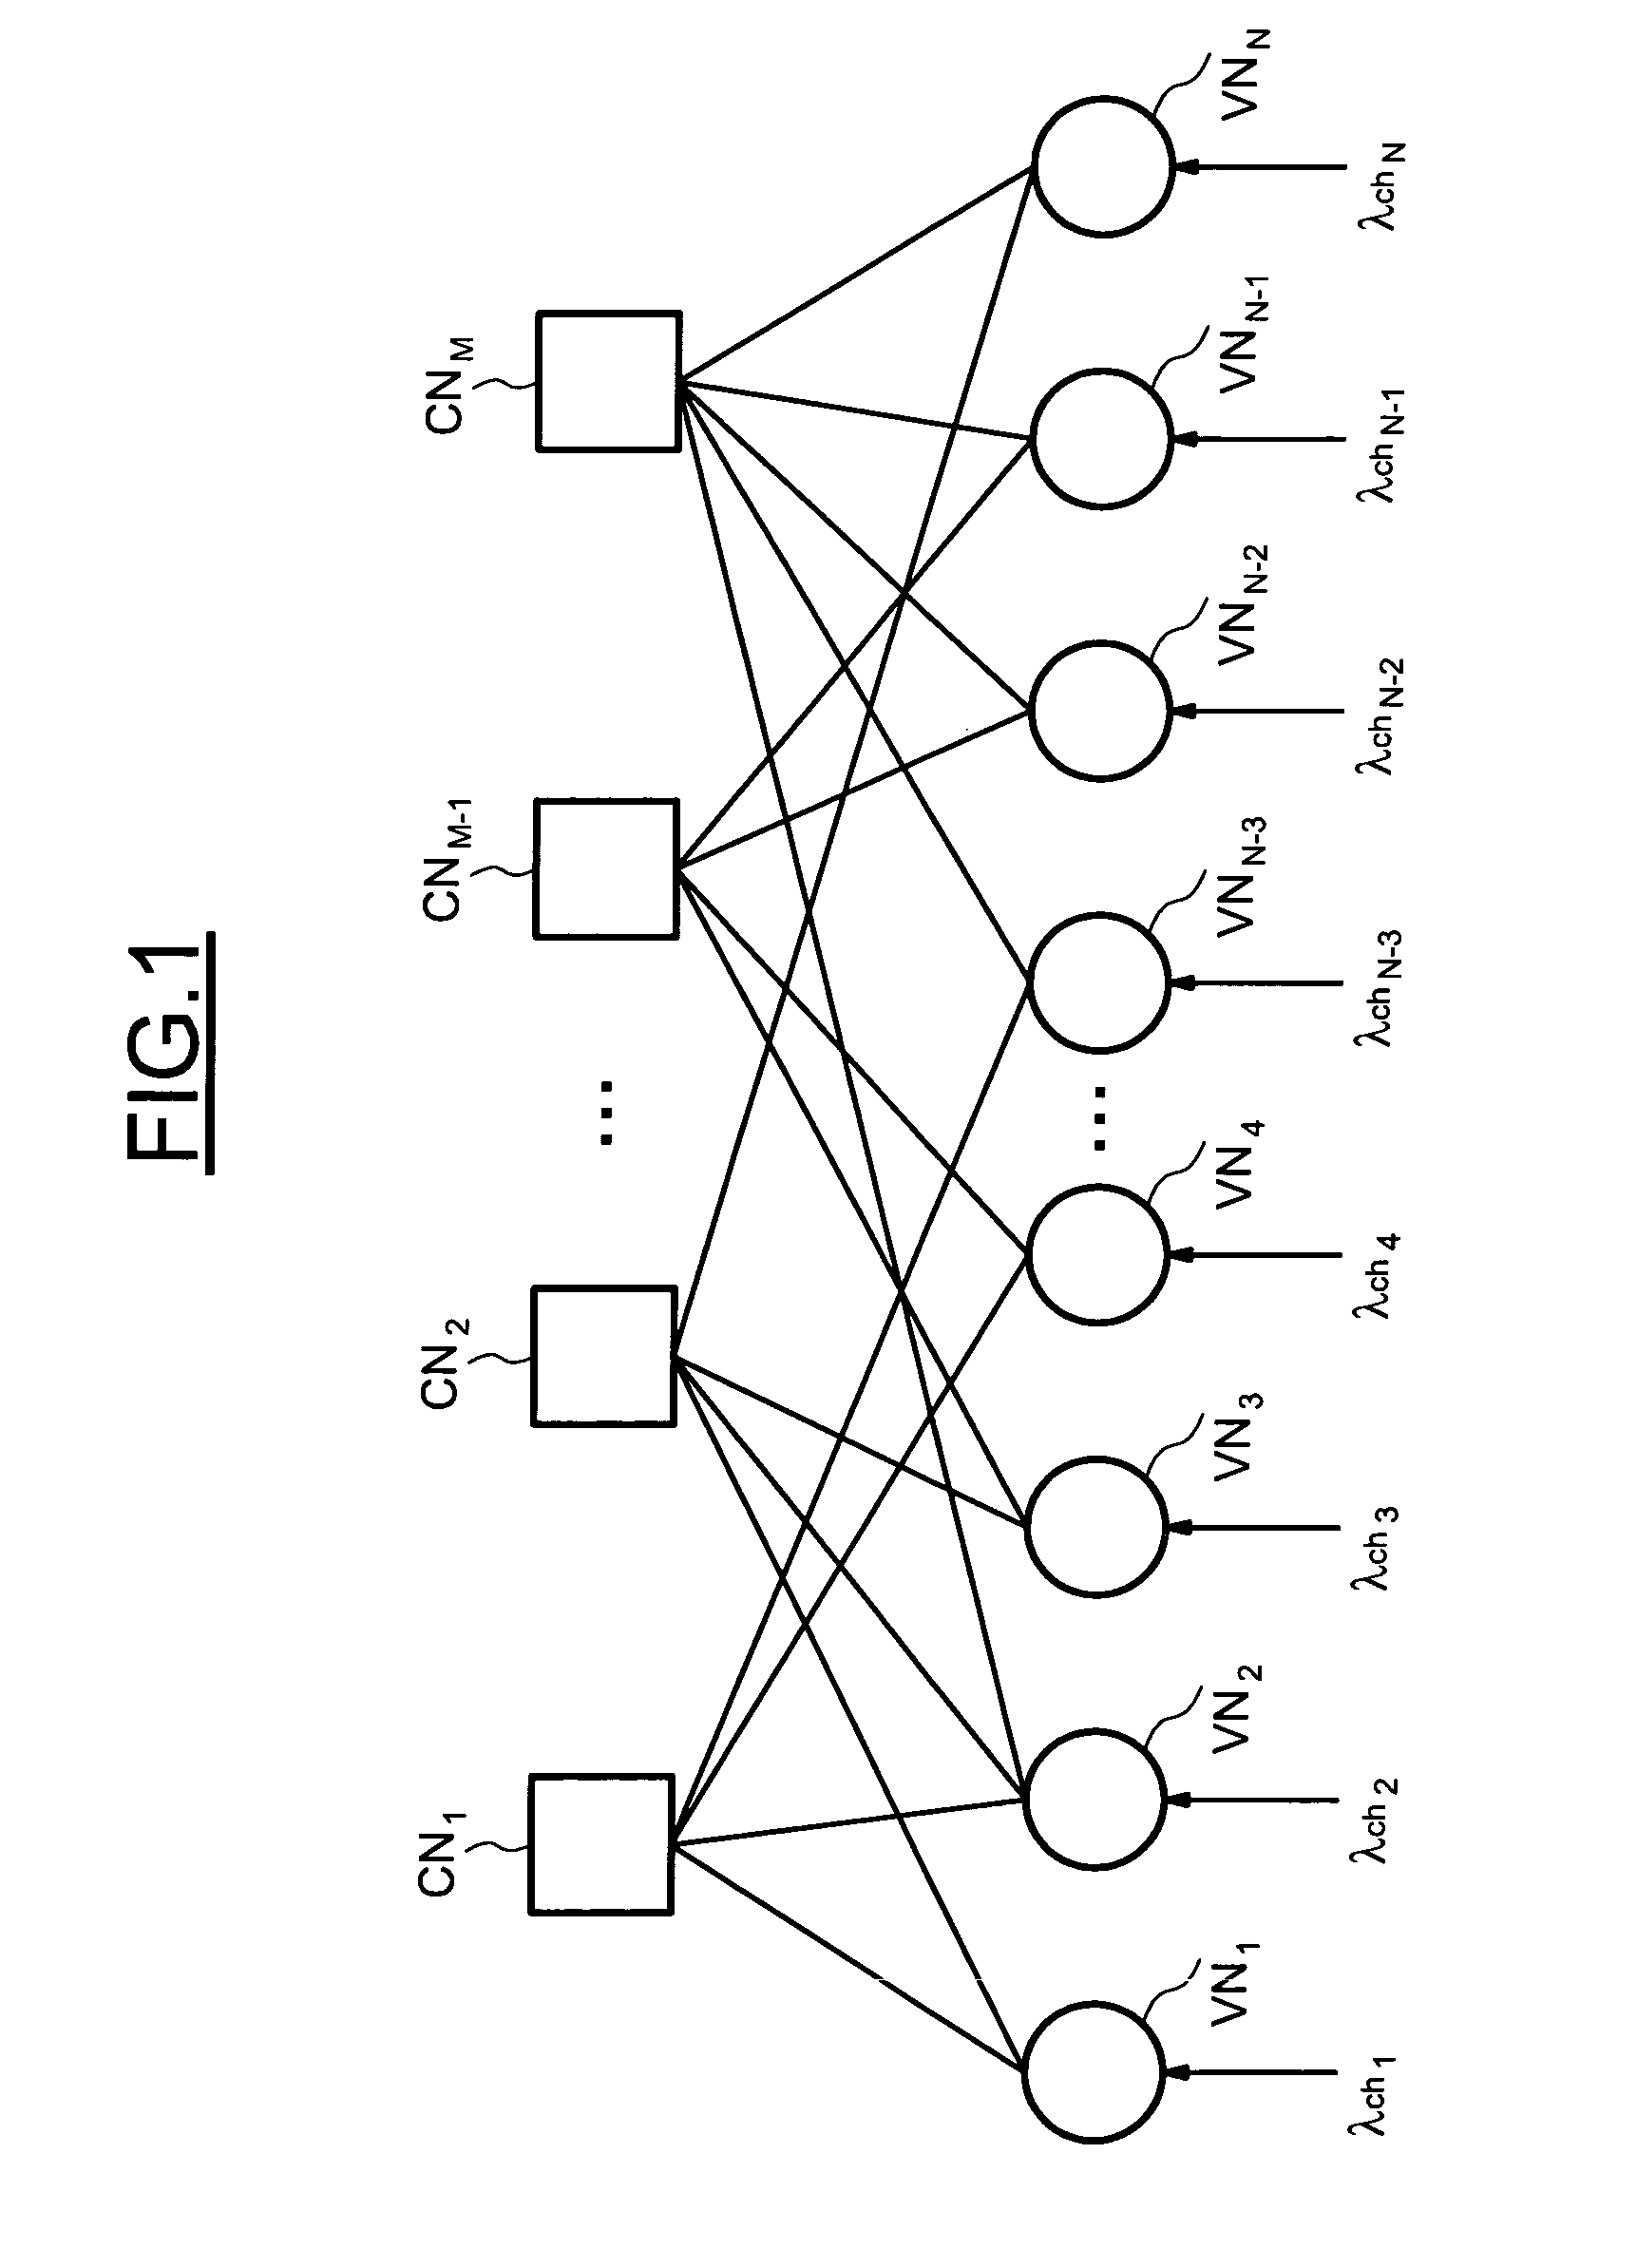 Method and device for controlling the decoding of a LDPC encoded codeword, in particular for DVB-S2 LDPC encoded codewords